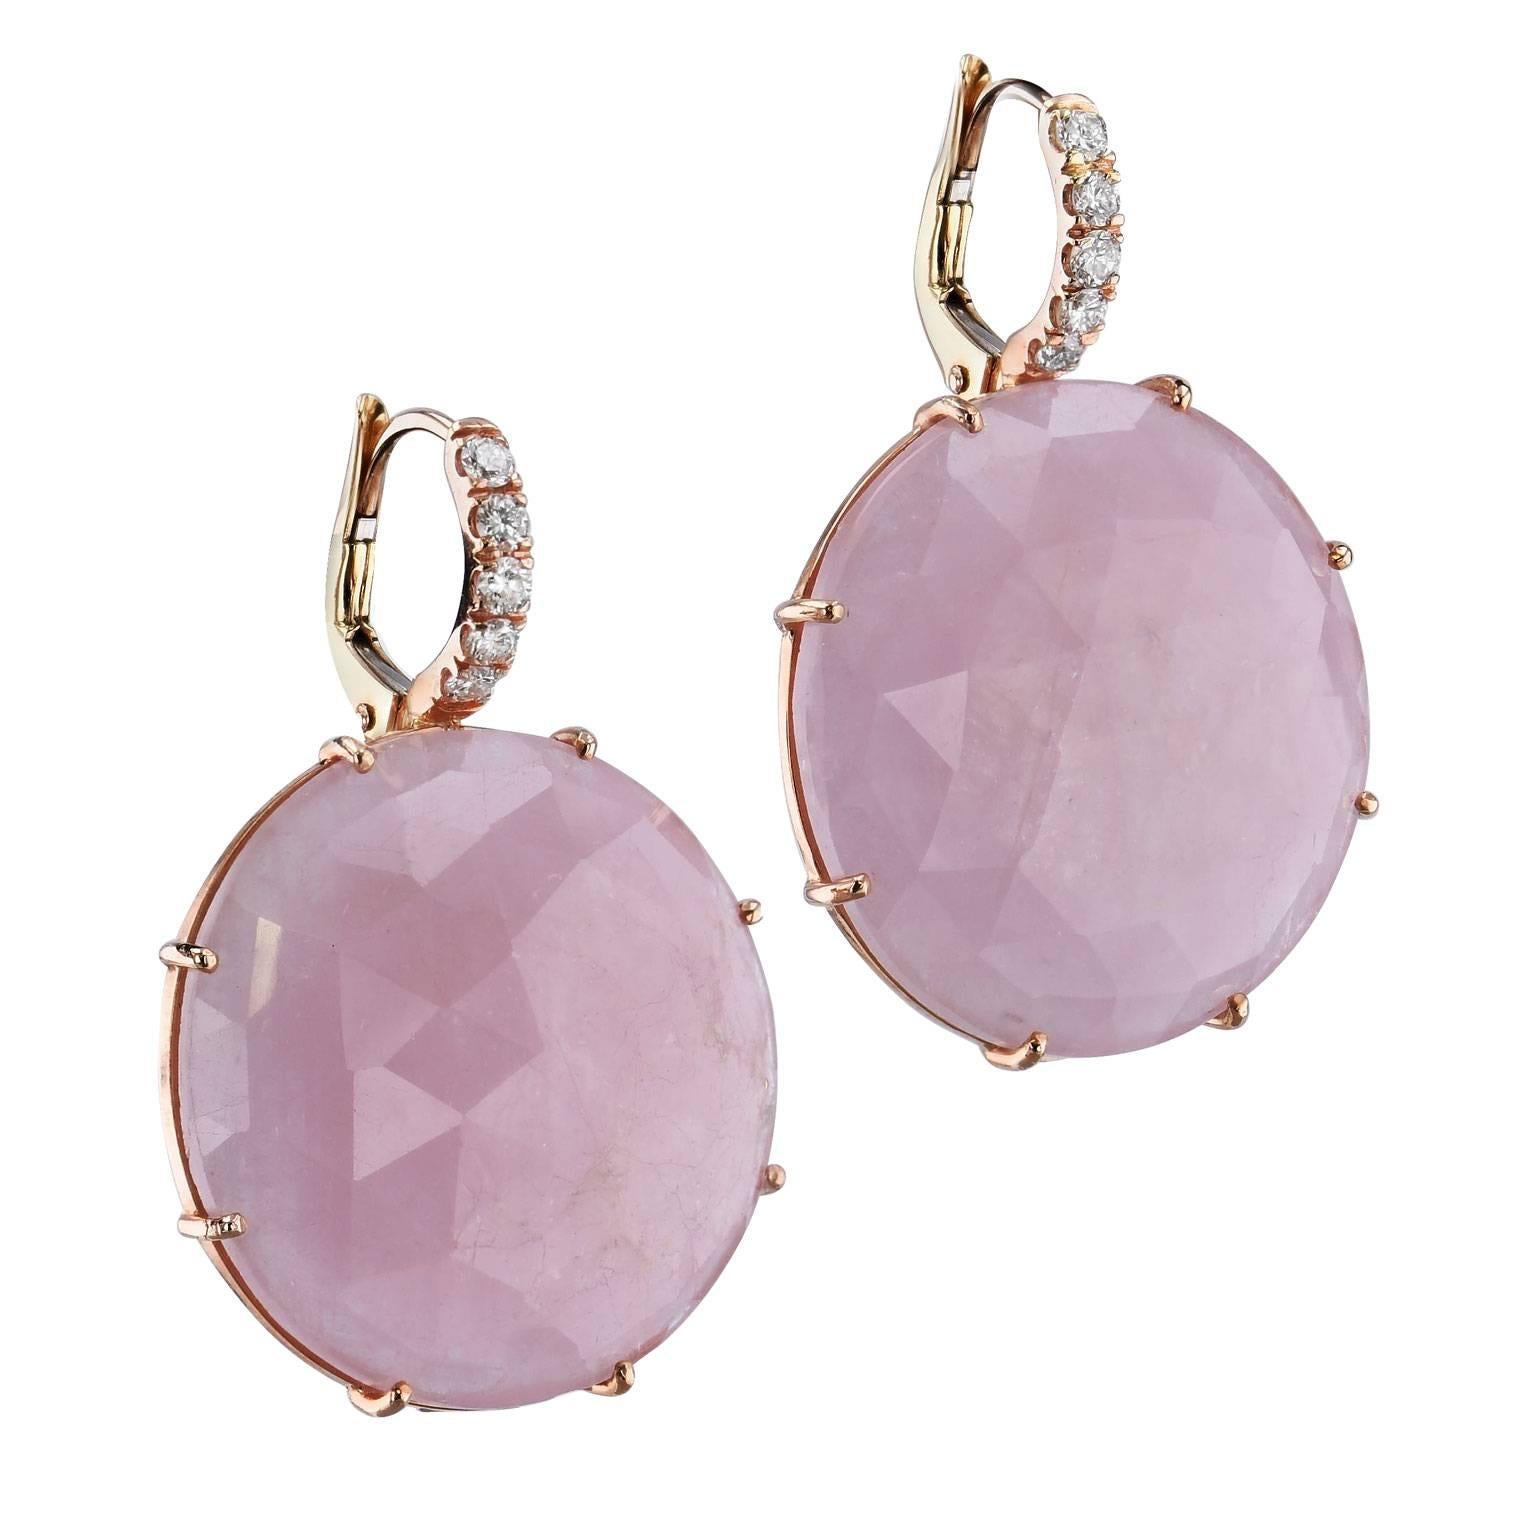 52.52 Carat Pastel Pink Sapphire Slice with Pave Diamonds Lever-Back Earrings

These stunning earrings are one of a kind and handmade by H&H Jewels.  The pastel pink is sumptuous and sweet in these 18 karat rose gold lever-back earrings. 52.52 carat